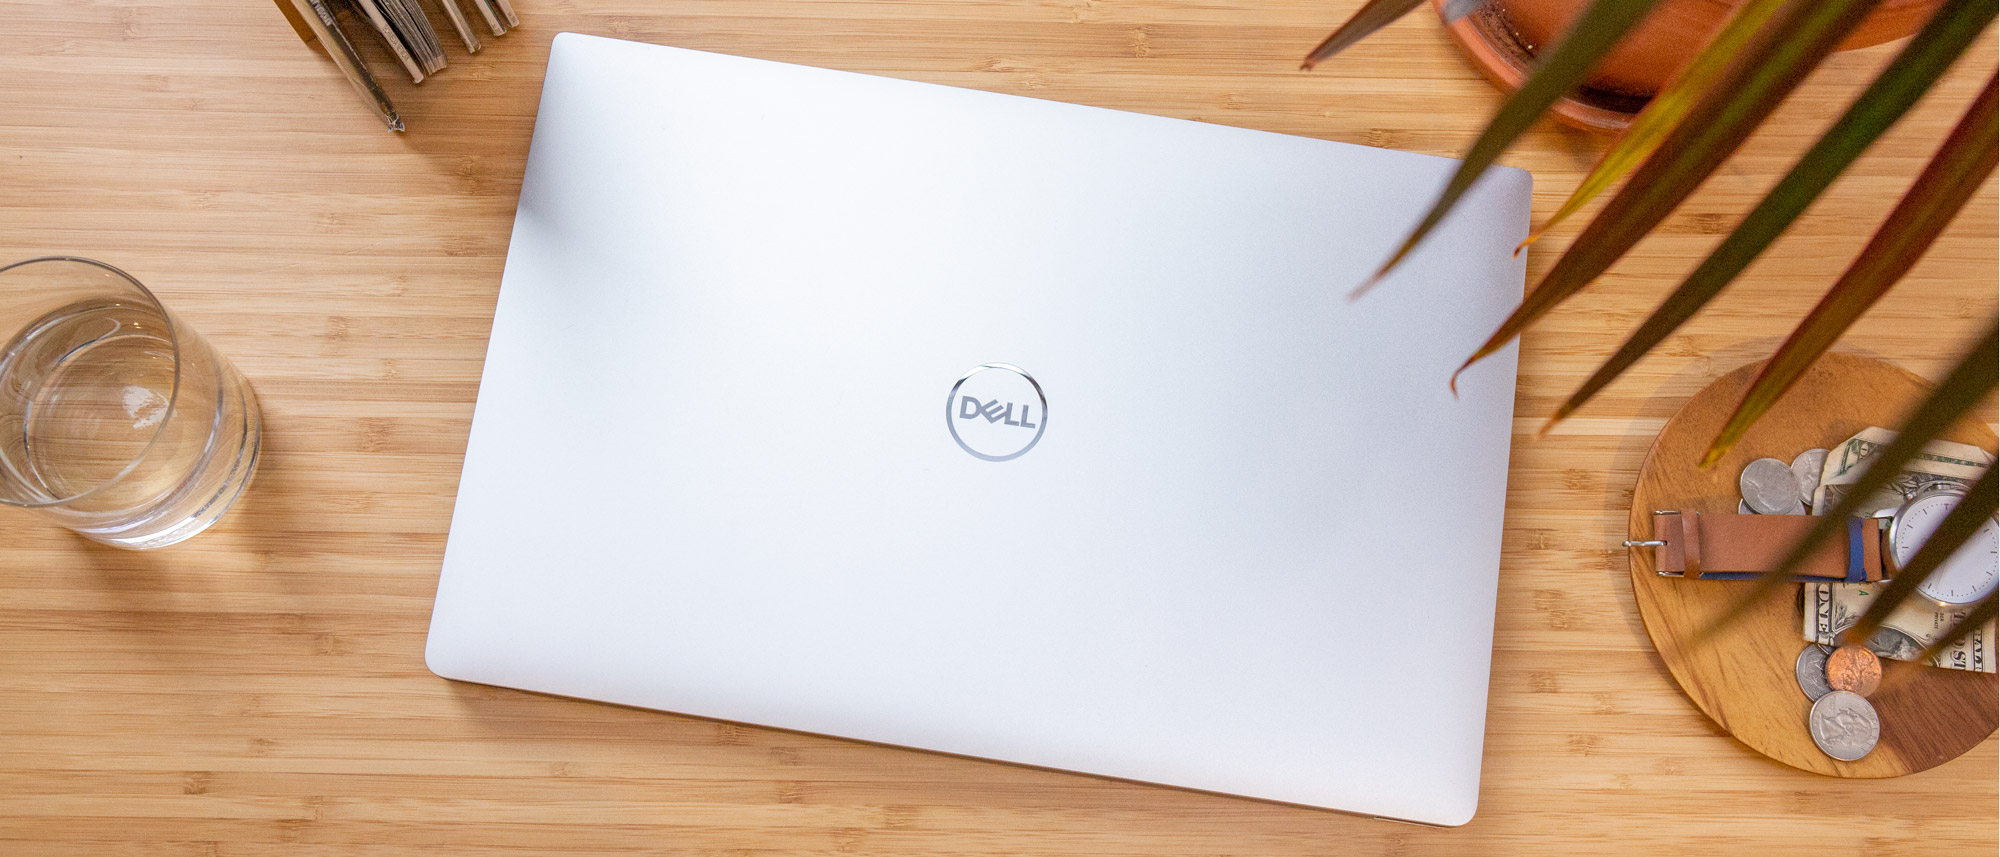 Dell Precision 5540 Review - Benchmarks and Specs | Laptop Mag